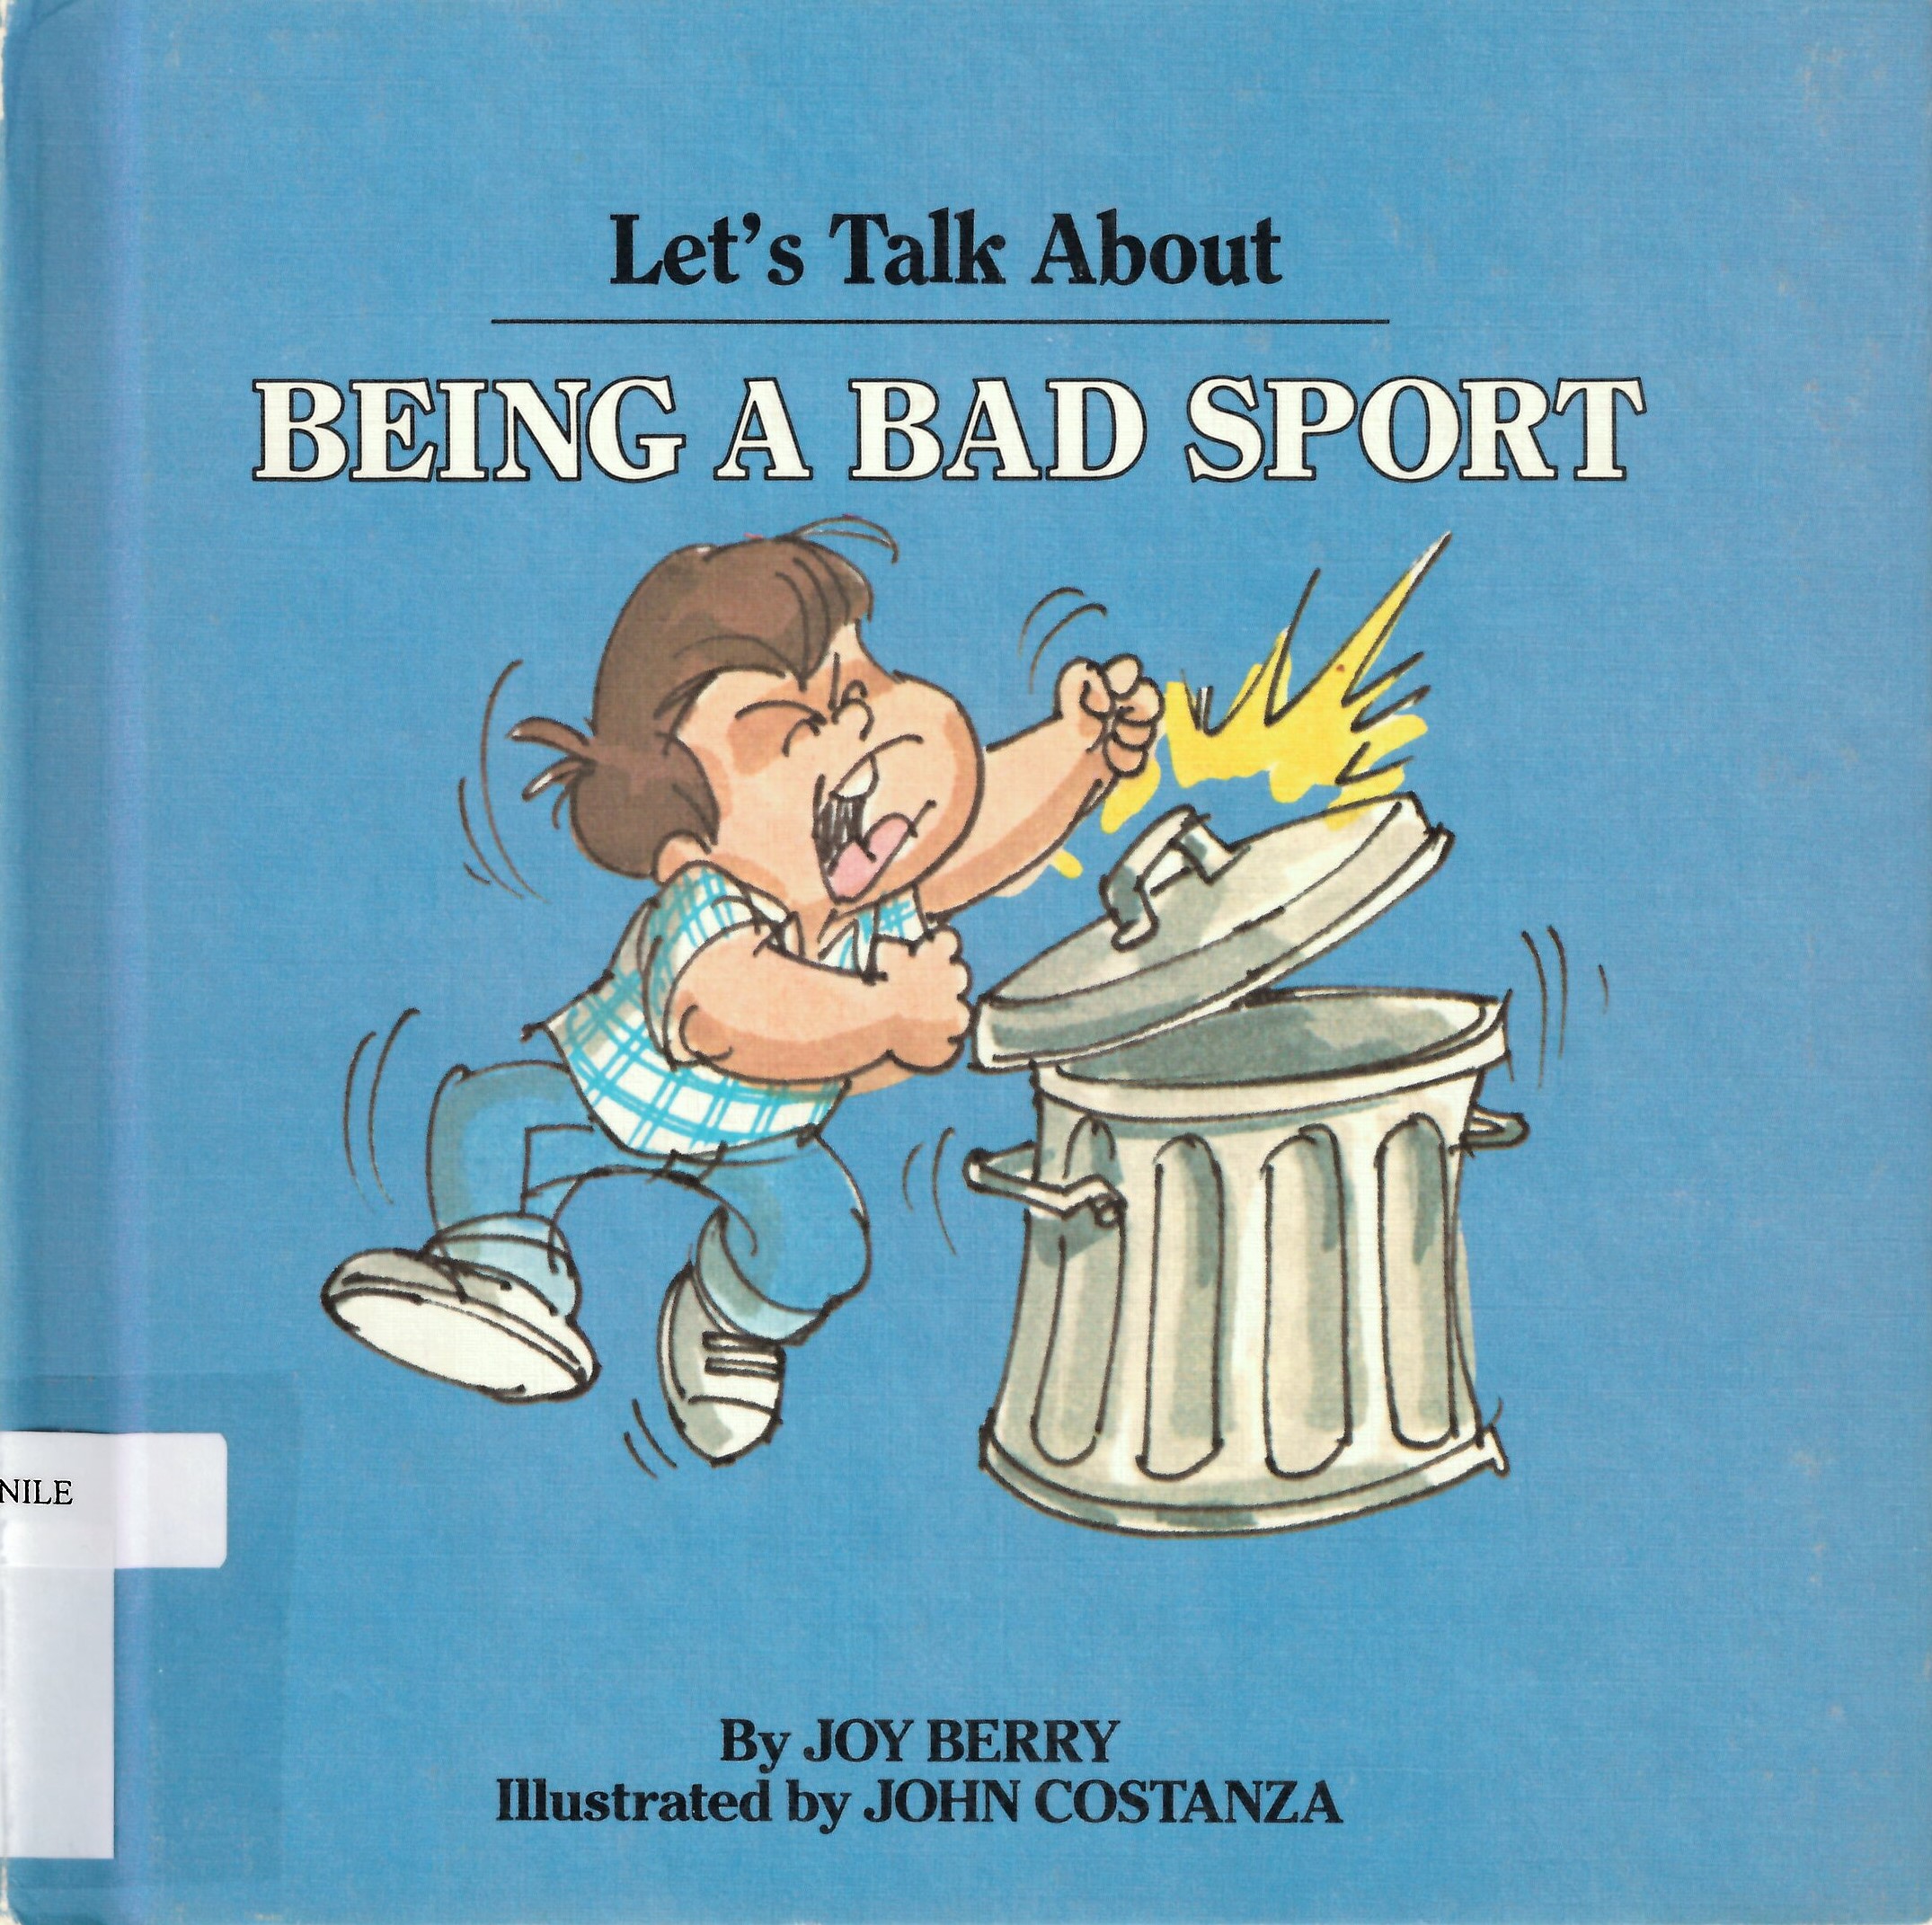 Let's talk about being a bad sport